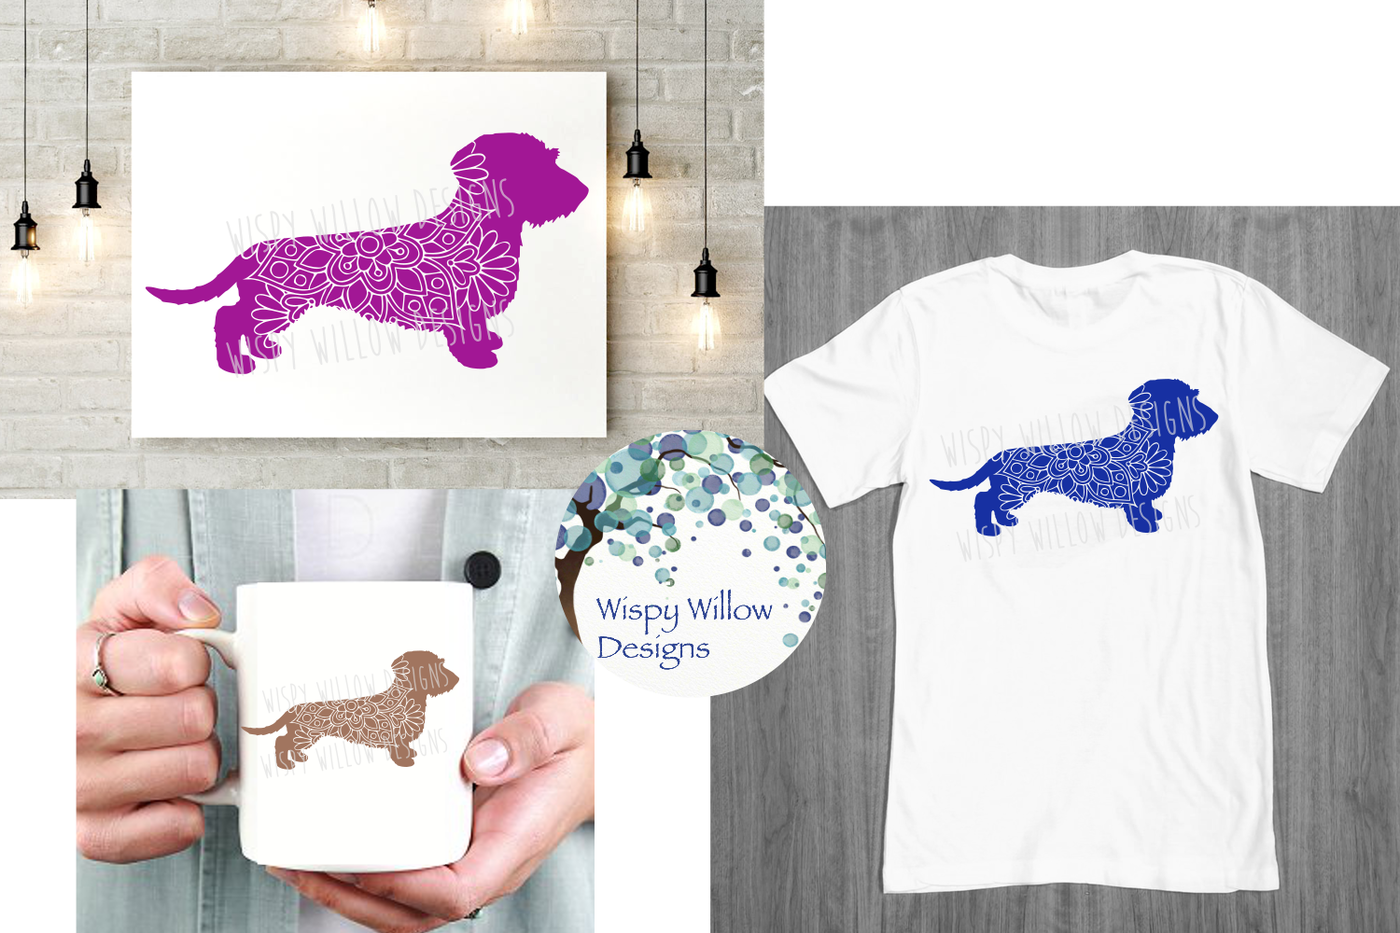 Download Wire Haired Dachshund Mandala Weiner Dog Svg Dxf Eps Png Jpg Pdf By Wispy Willow Designs Thehungryjpeg Com